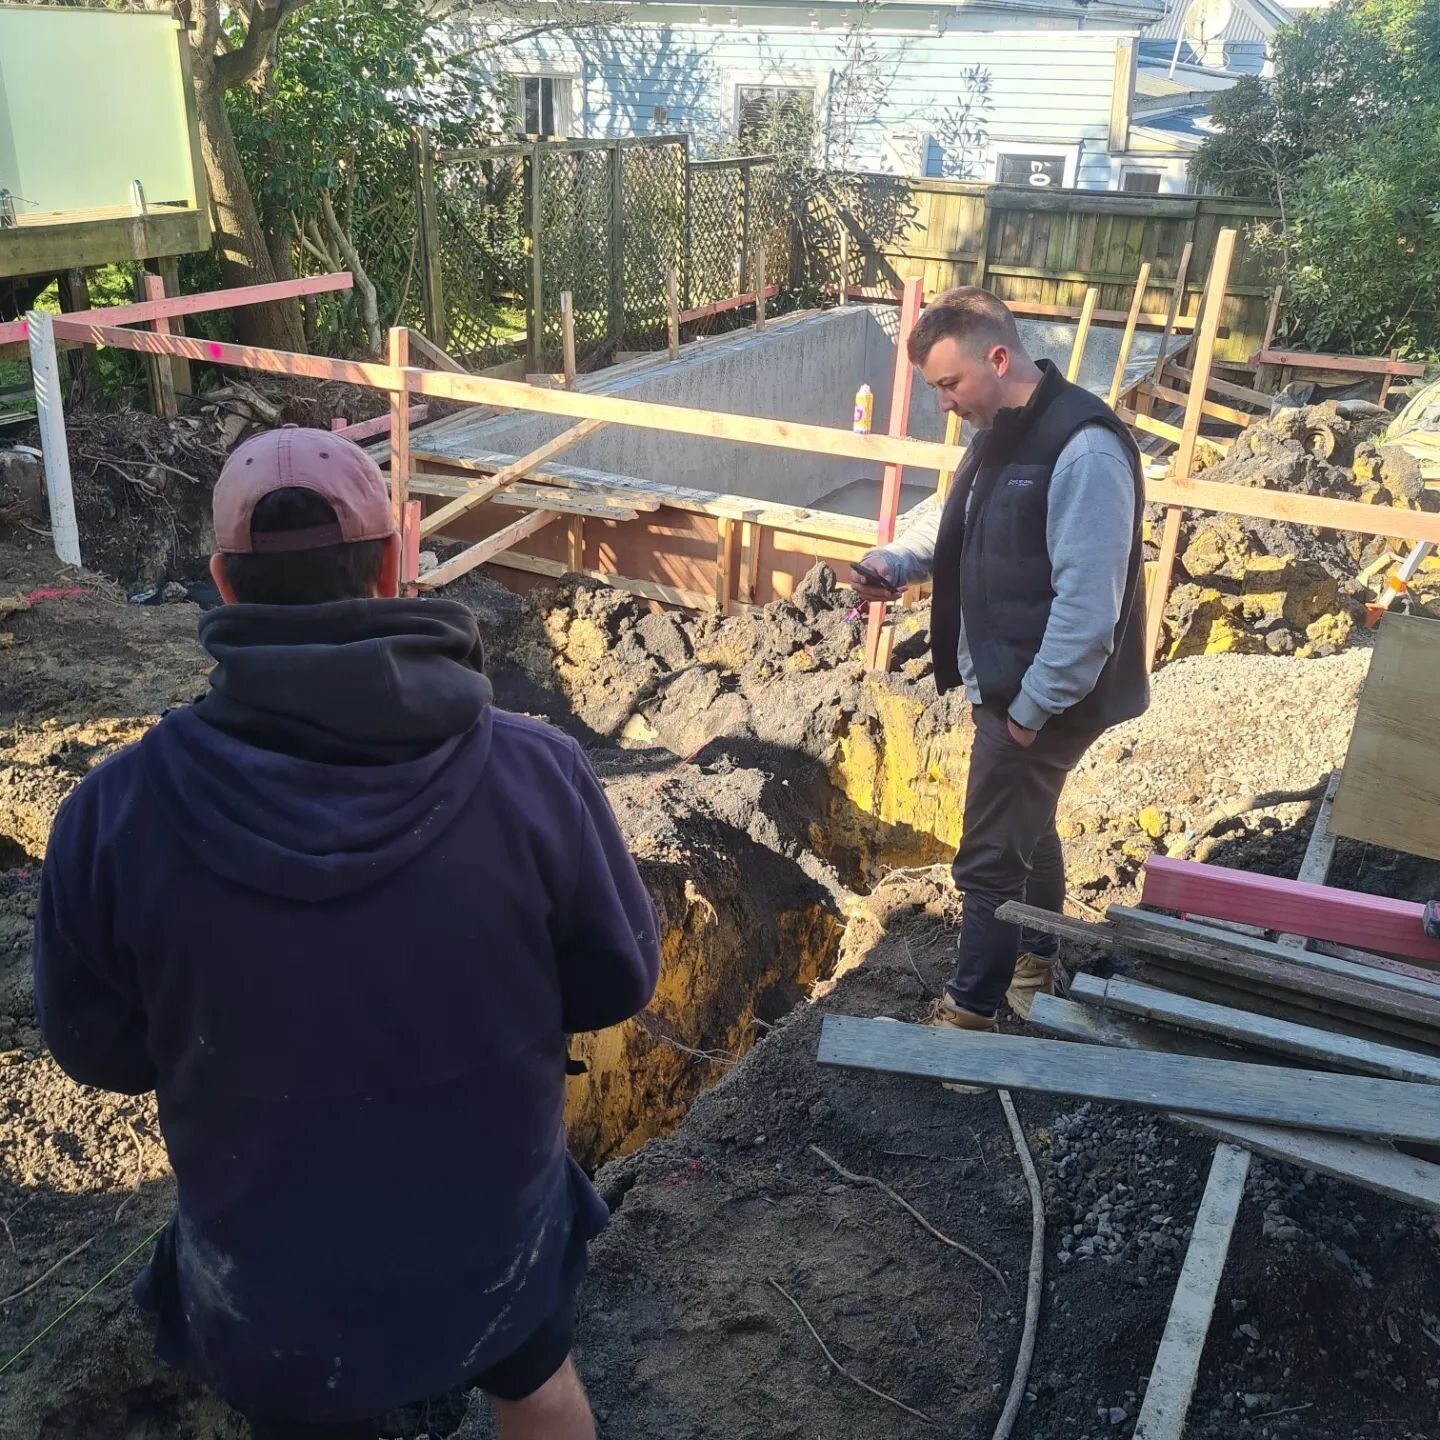 Team working making the dream work at our Grey Lynn project! Swipe to see some quirky discoveries! 

 #nextlevelconstruct&nbsp;#designandbuild&nbsp;#building&nbsp;#interiordesign&nbsp;#engineering&nbsp;#renovation&nbsp;#extension&nbsp;#reclads&nbsp;#